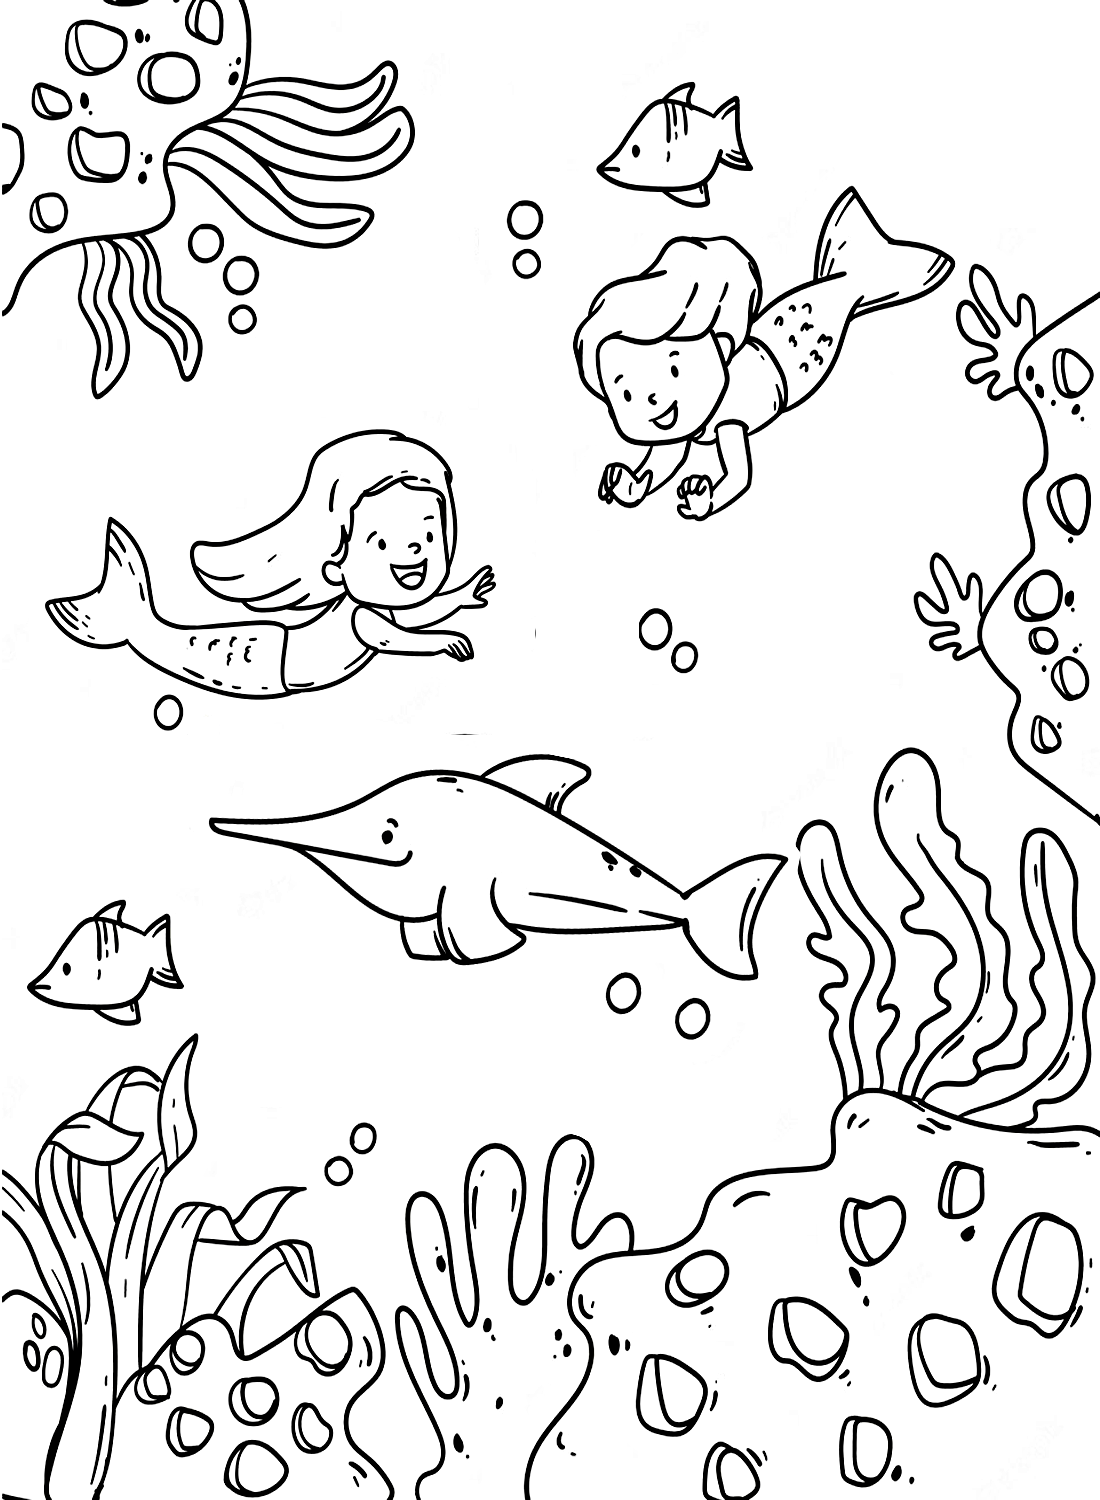 Coral and ocean Coloring Page